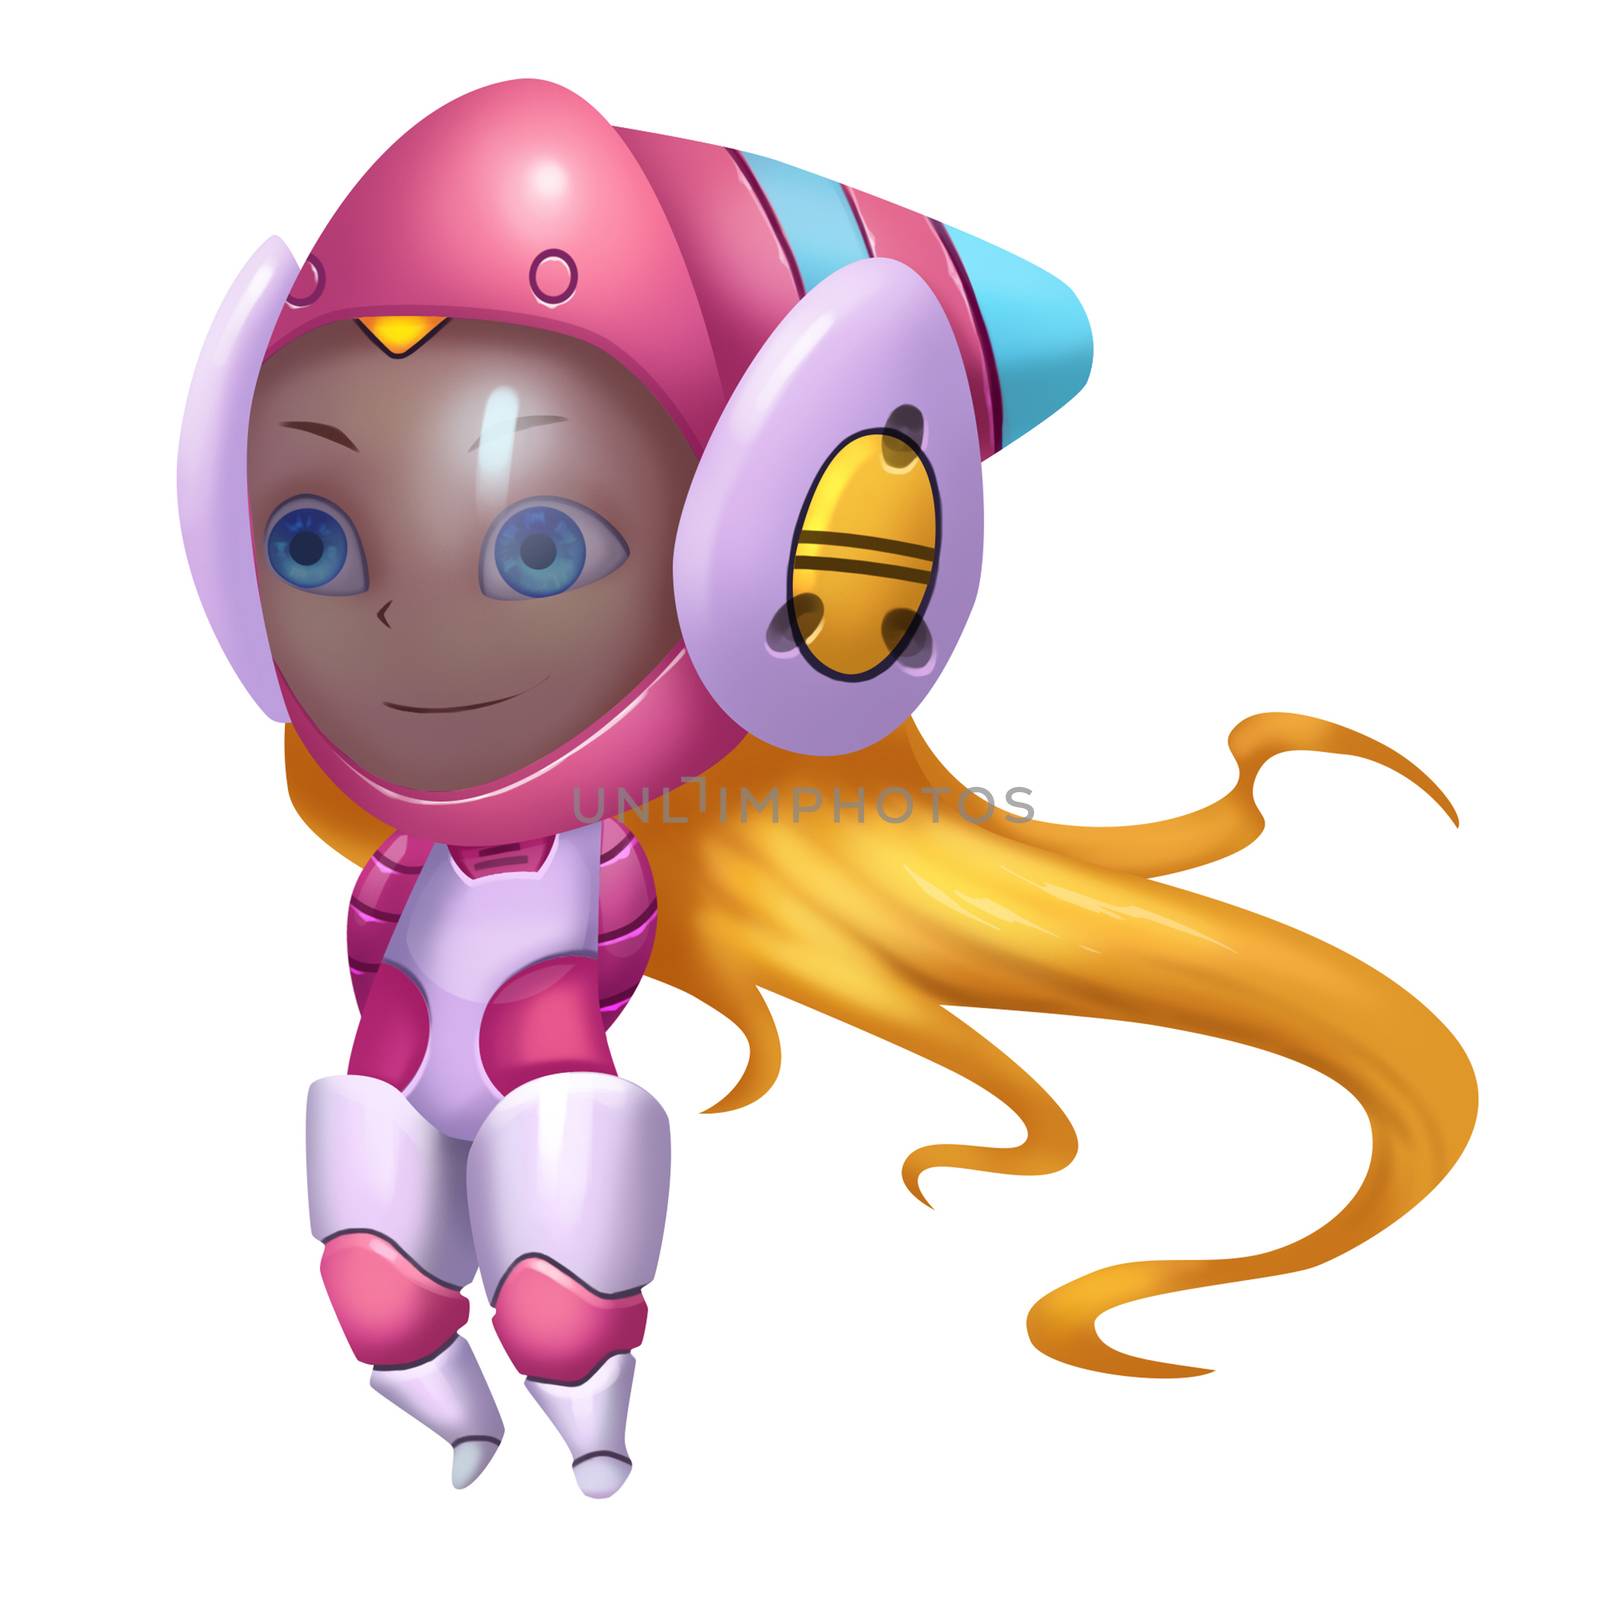 Illustration: Fantastic Theme - Space Girl - Element Creation/Character Design - Realistic / Cartoon Style by NextMars